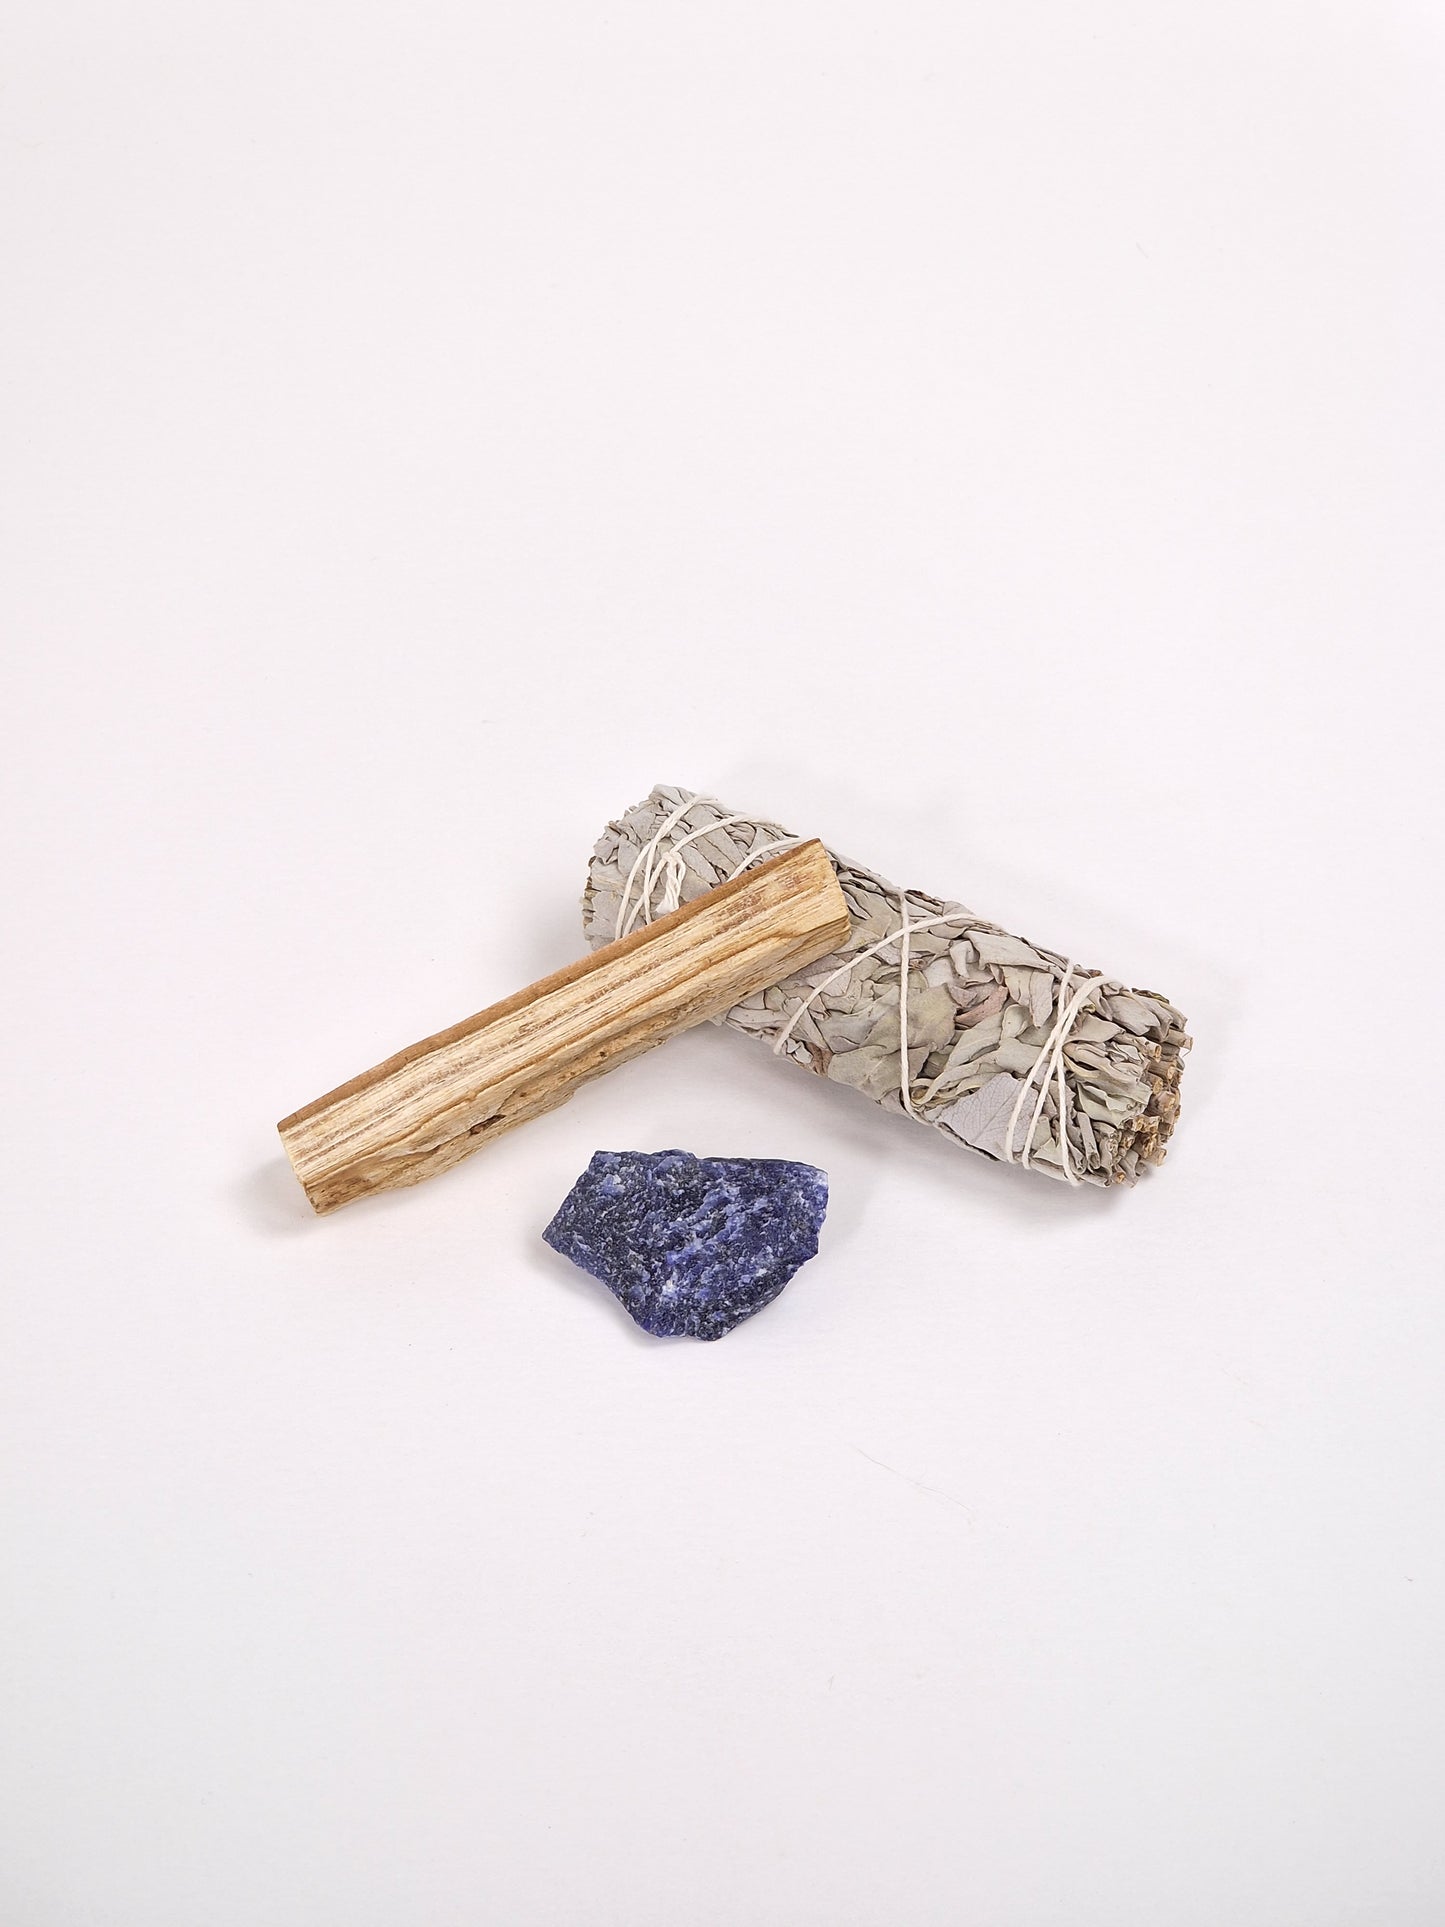 Sodalite crystal with sage and smudge stick